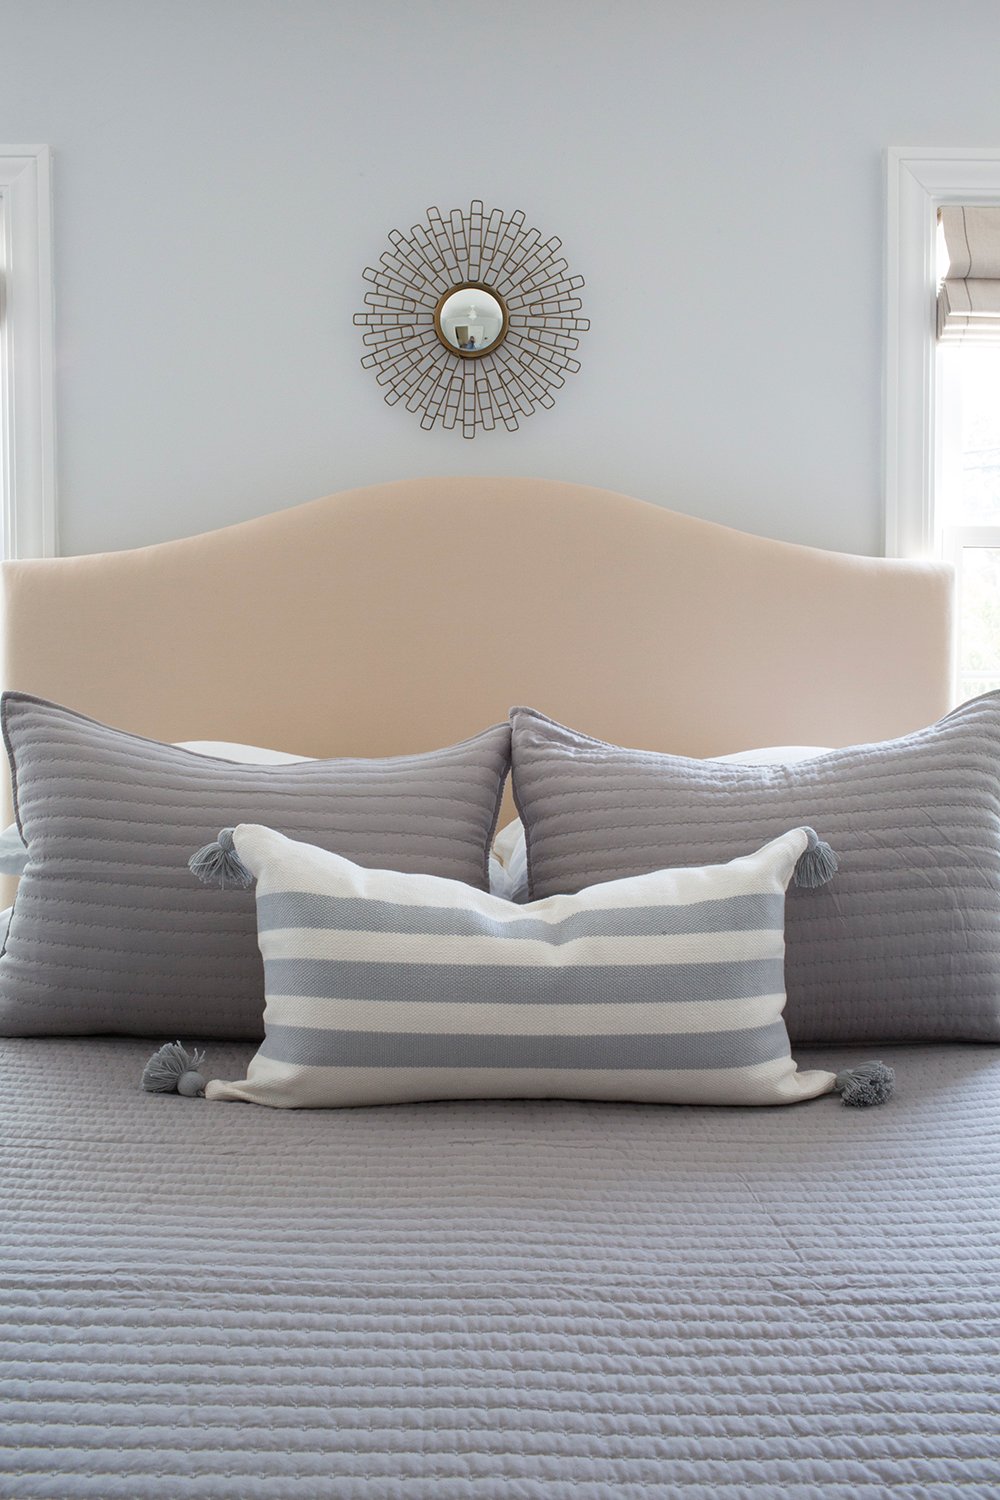 How to Give Your Bedroom a Refresh Using Textiles - roomfortuesday.com